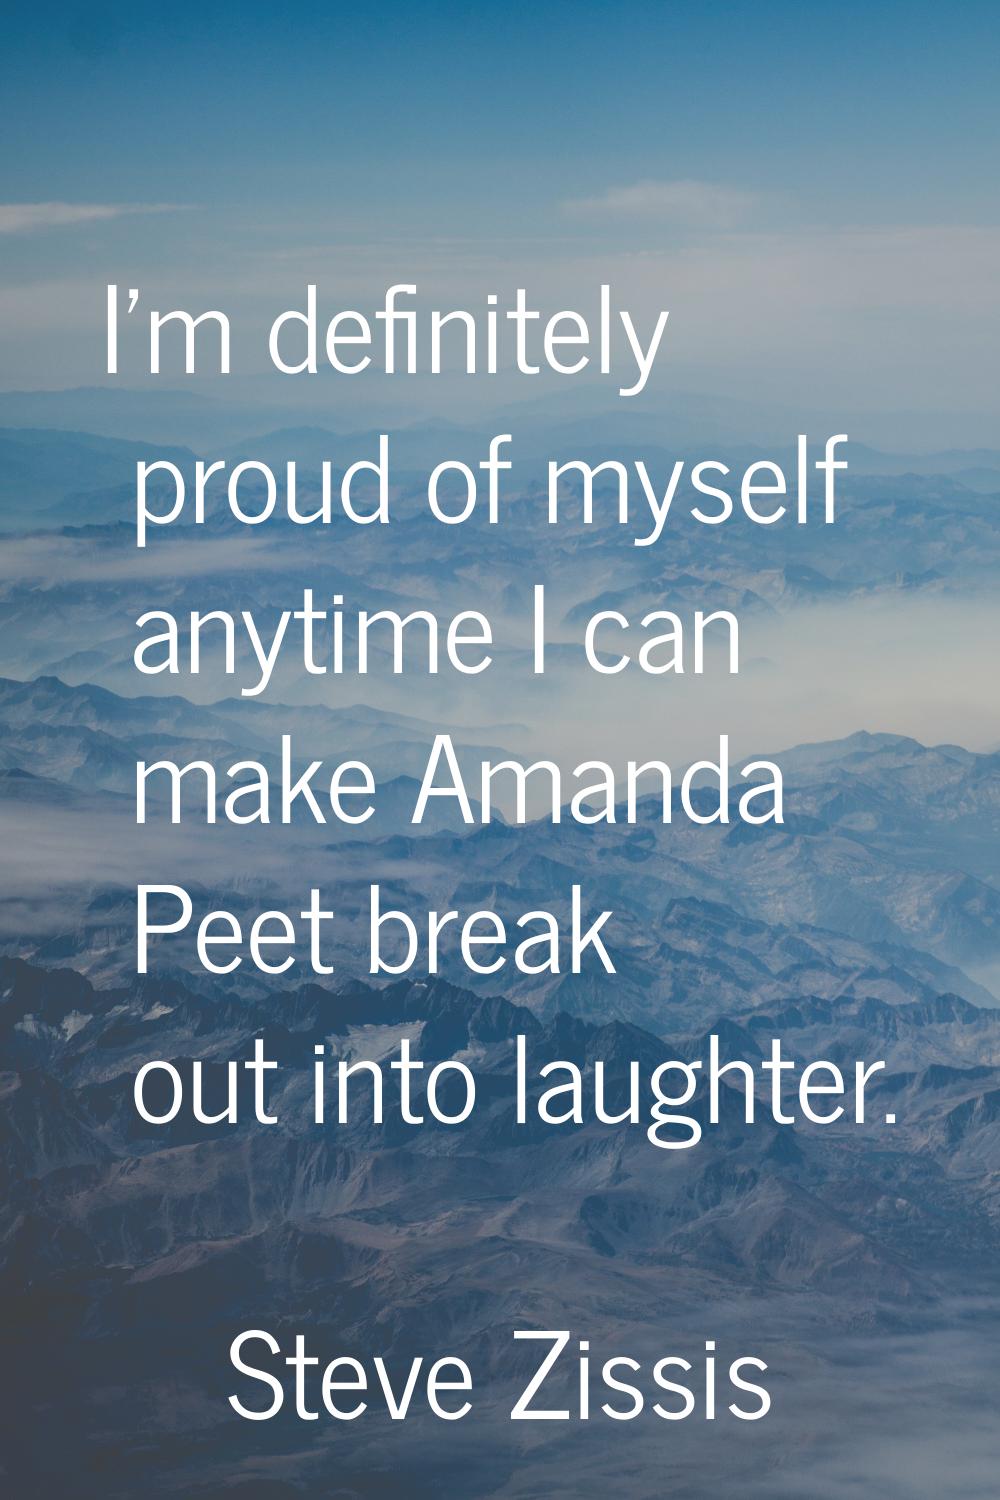 I'm definitely proud of myself anytime I can make Amanda Peet break out into laughter.